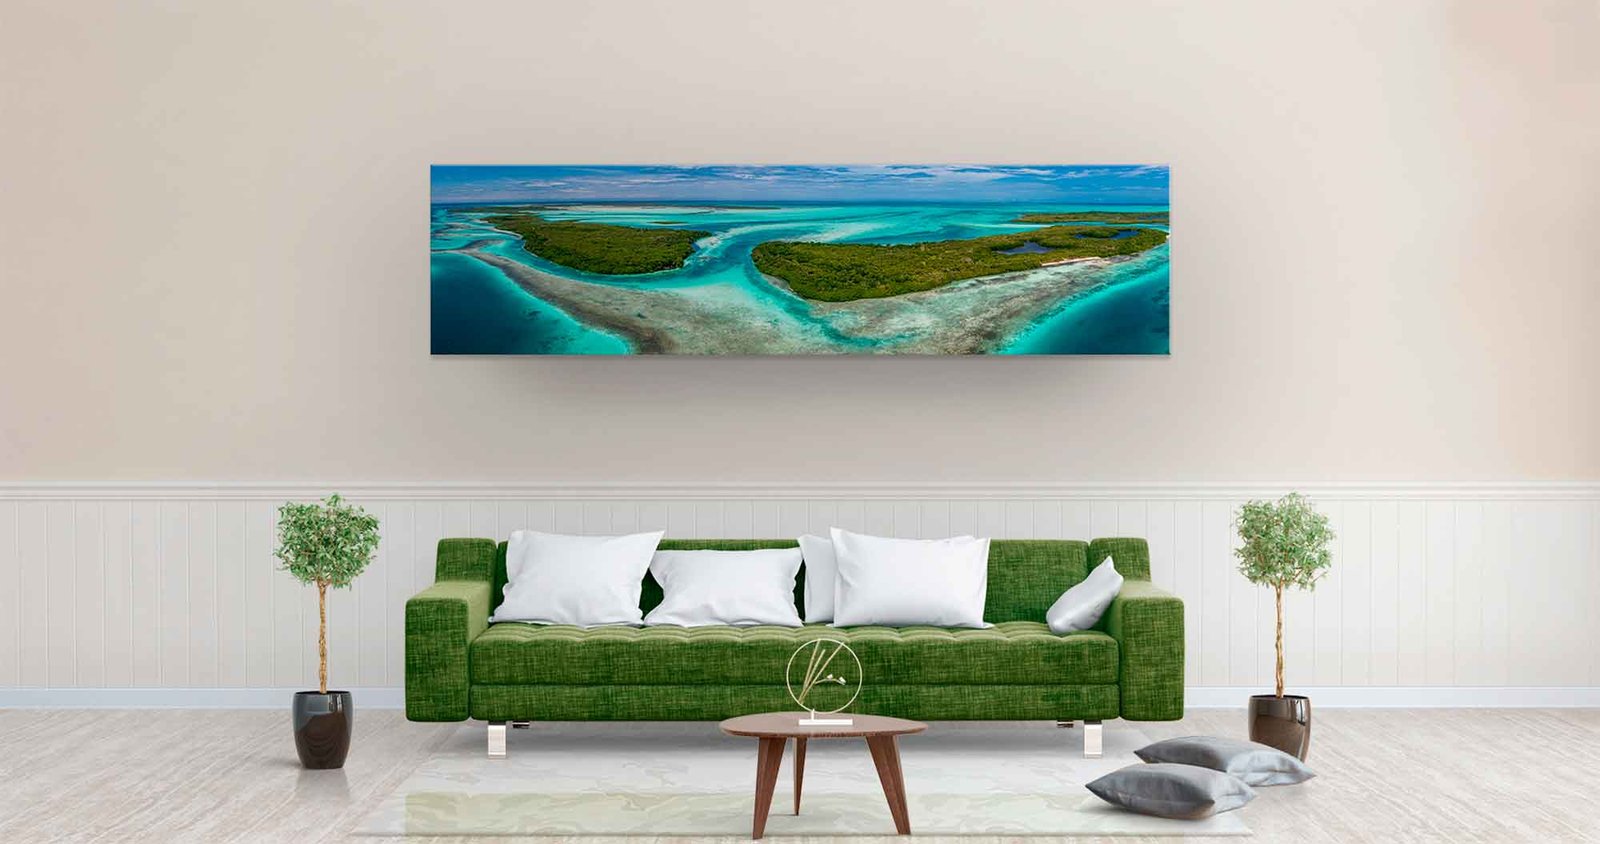 CANVAS WALL ART LOS ROQUES - ORGBLUEWATER Photography